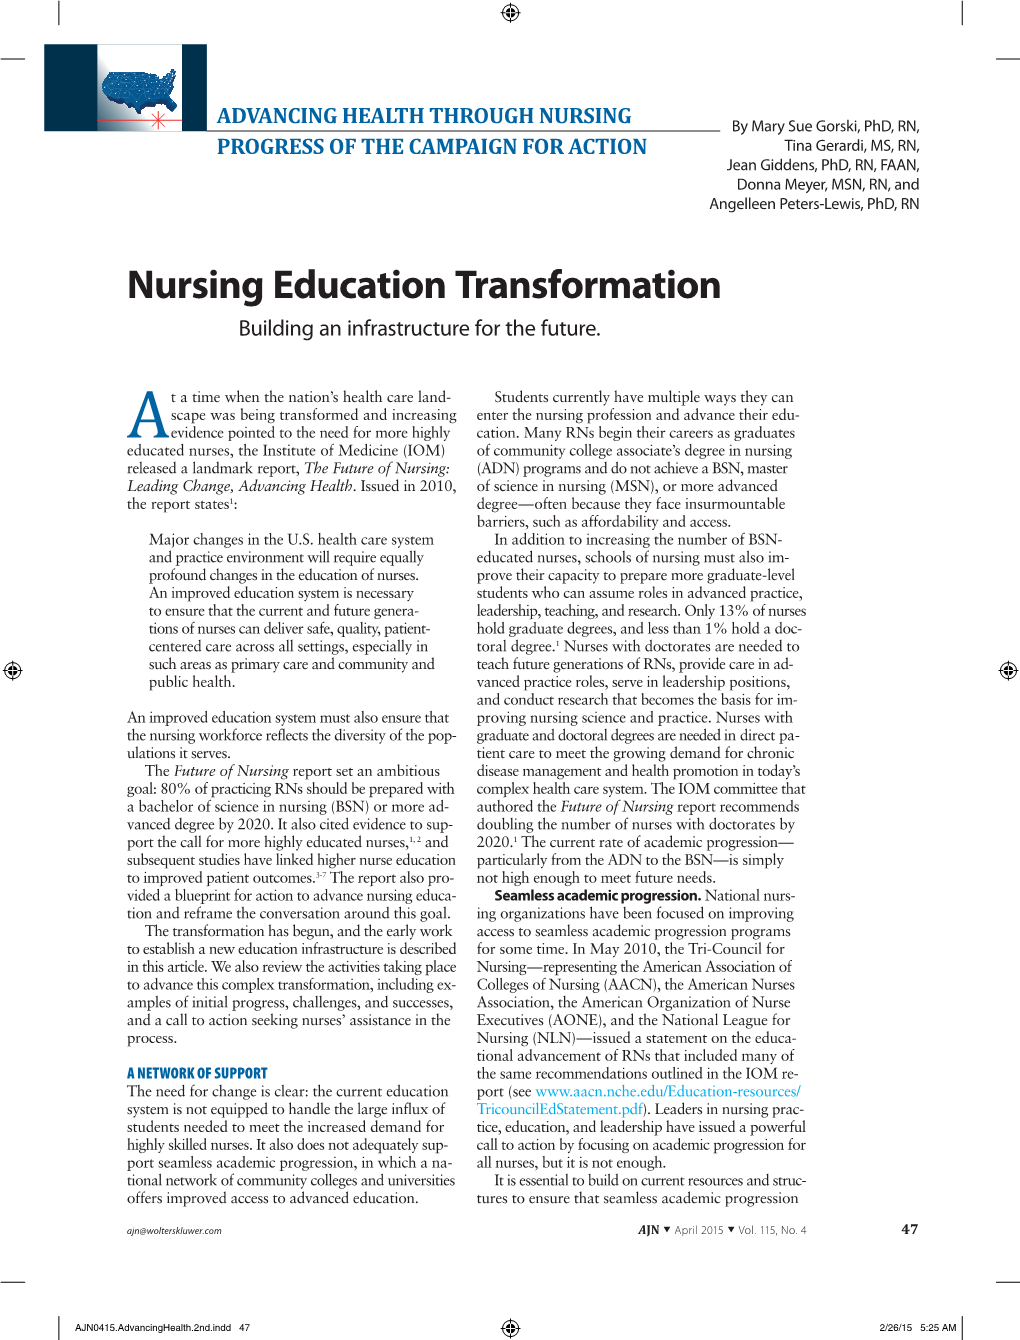 Nursing Education Transformation Building an Infrastructure for the Future